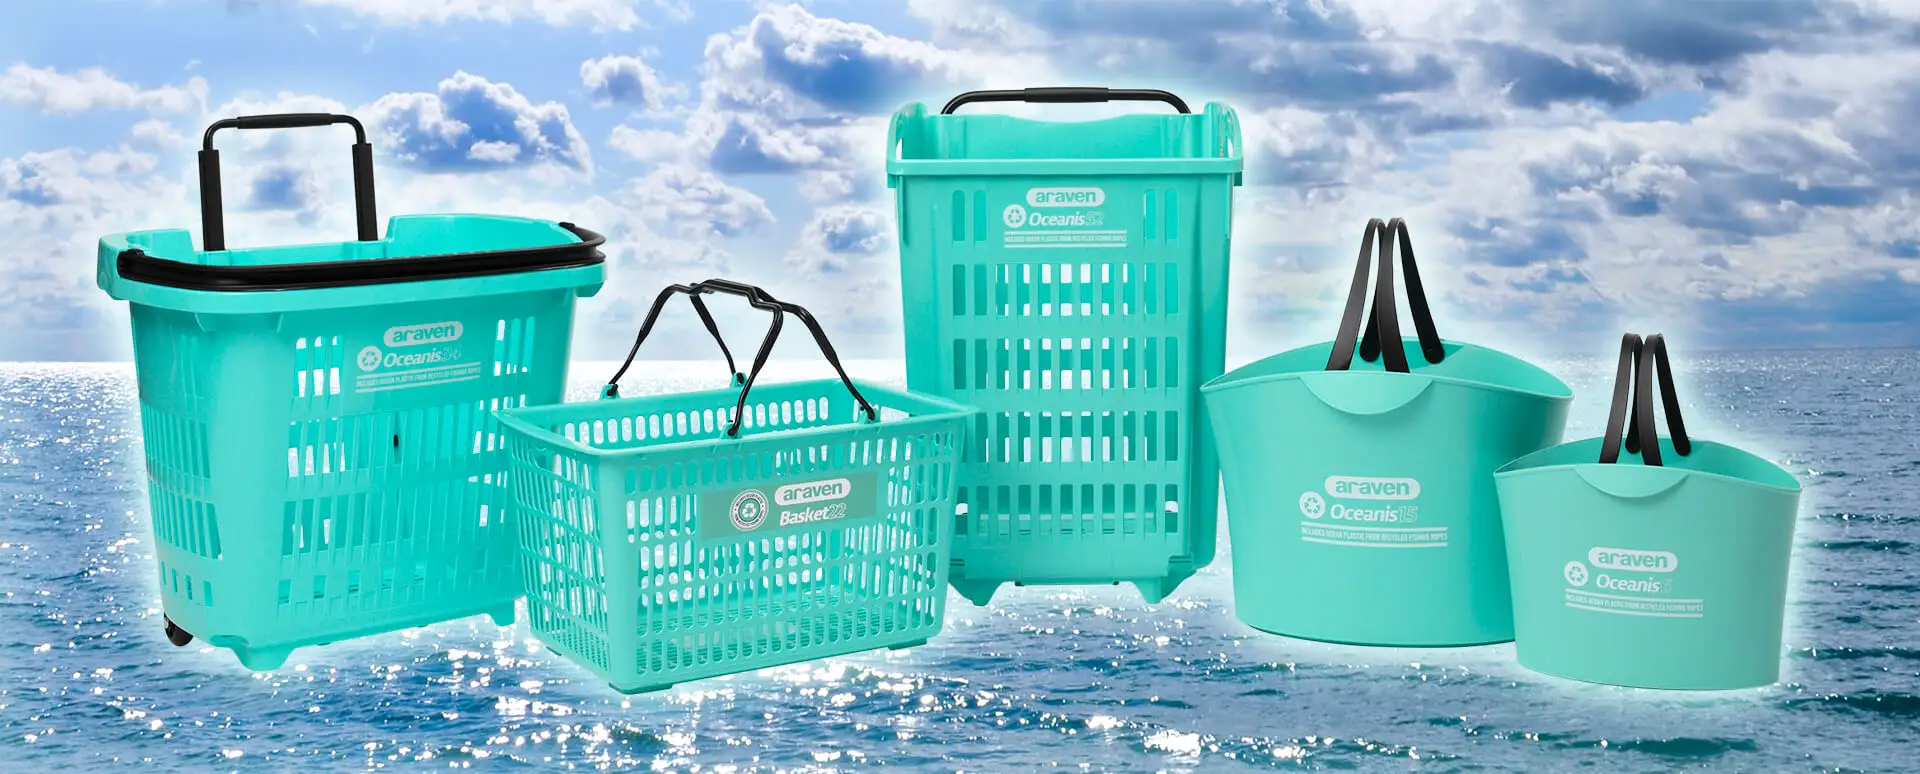 Oceanis Recycled Shopping Baskets